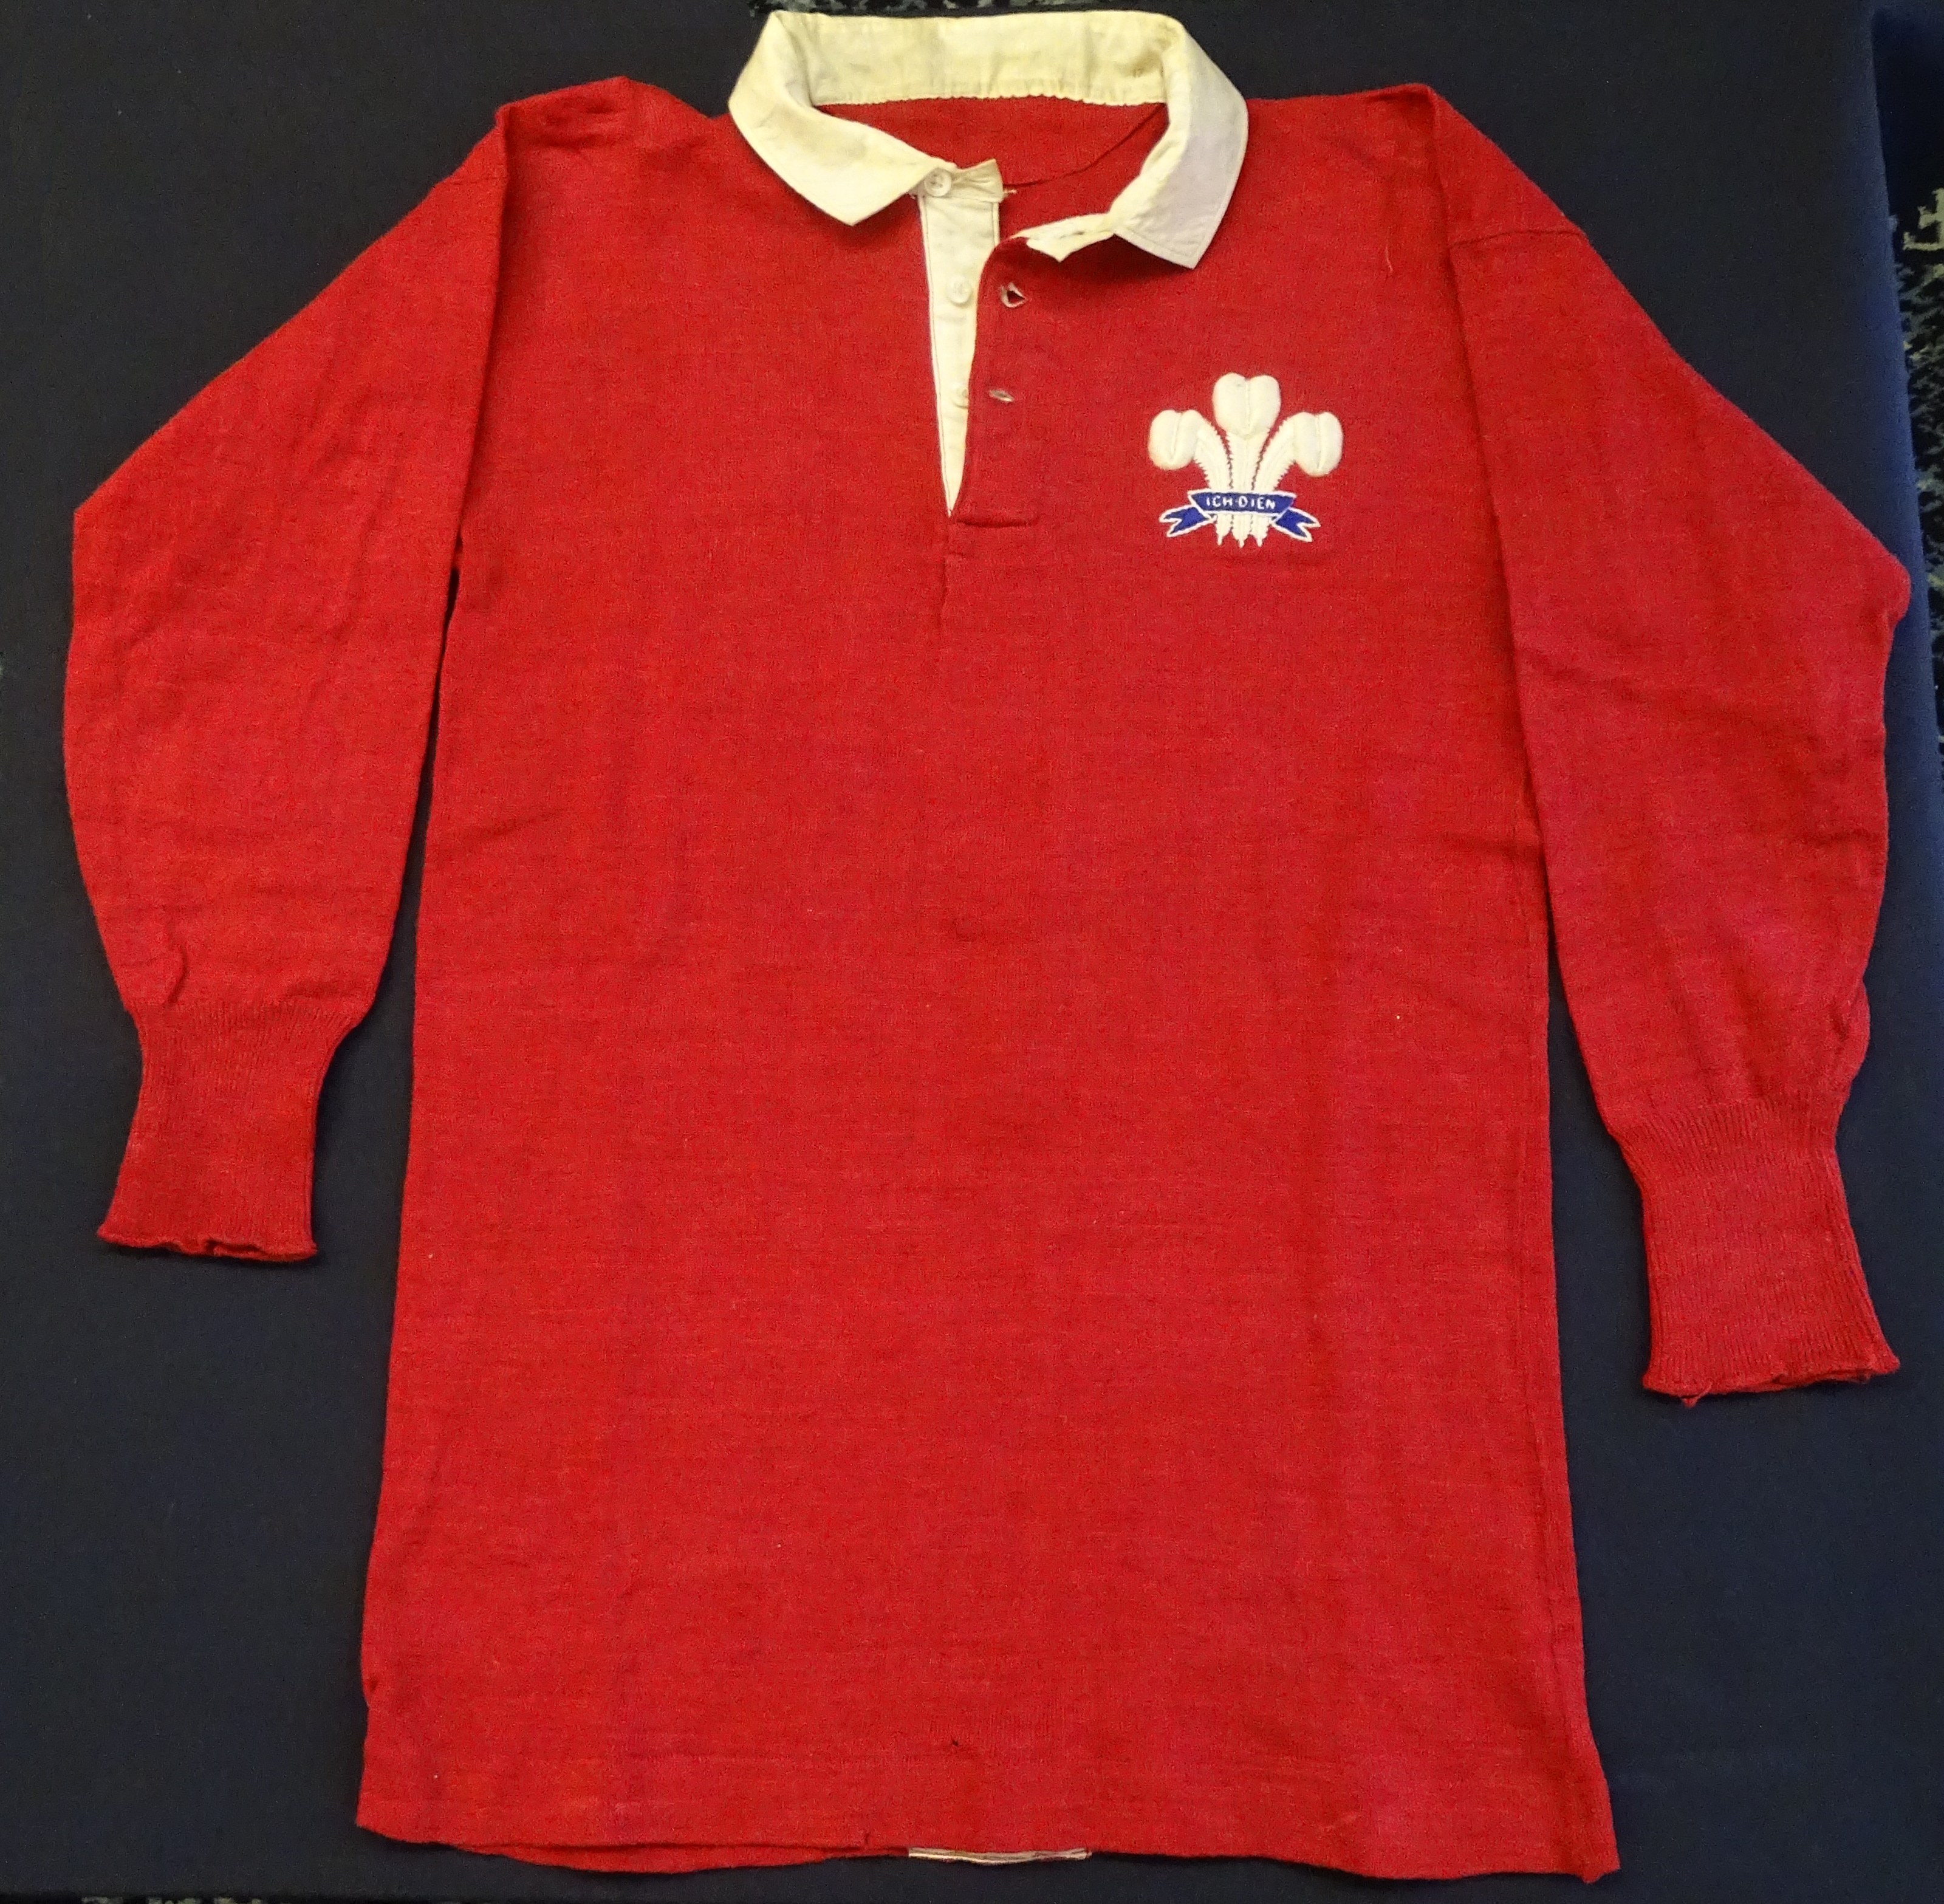 Jersey - Wales 1910 | Cardiff Rugby Museum